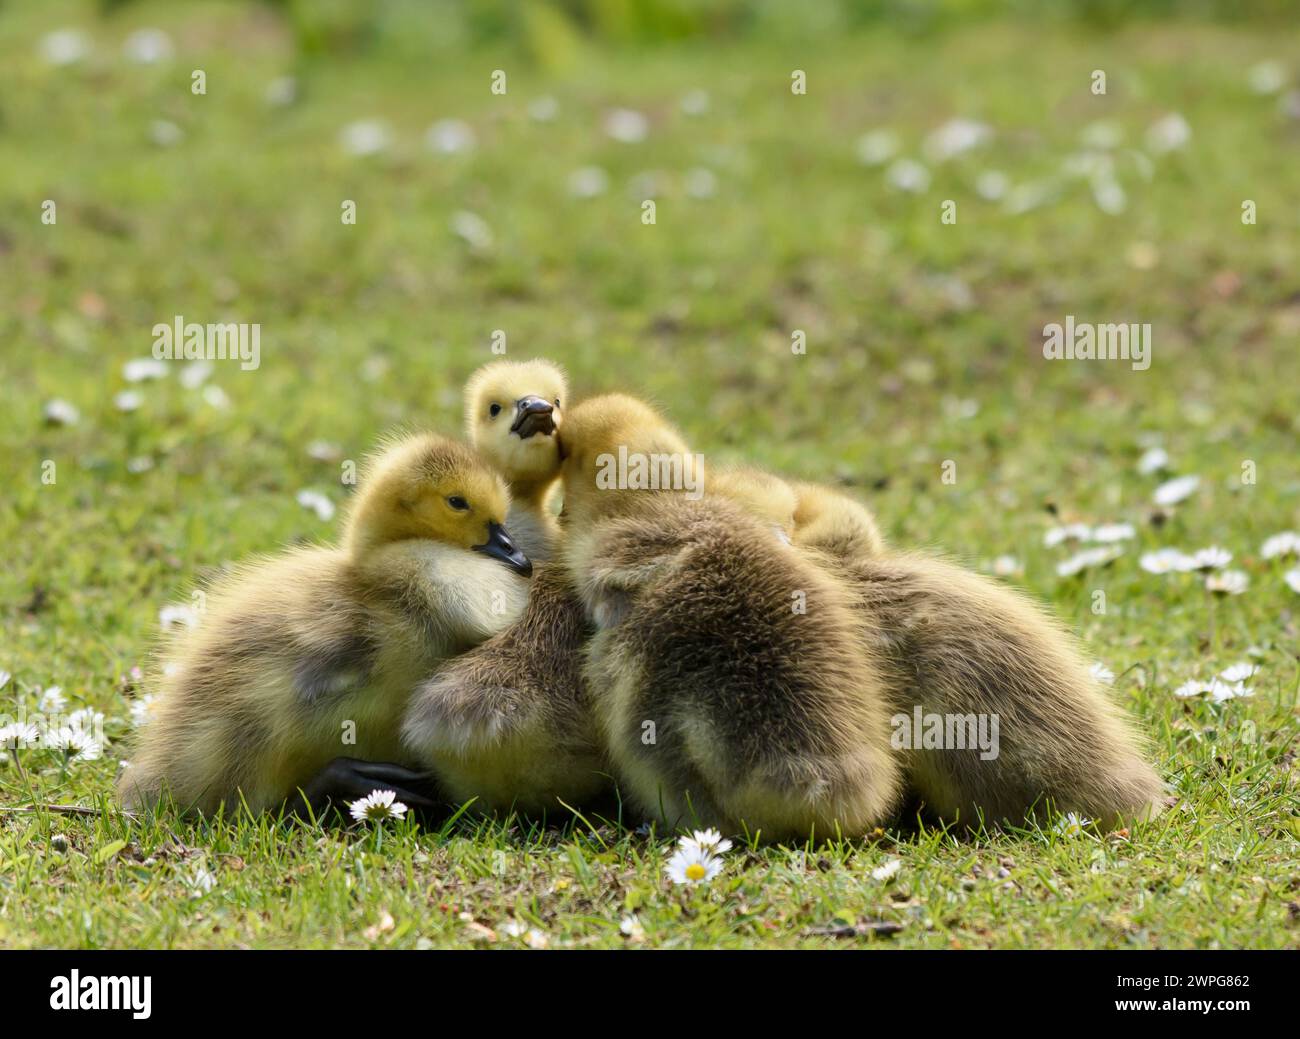 Canada goose, Branta canadensis, several goslings huddled together on a daisy covered bankside, May. Stock Photo